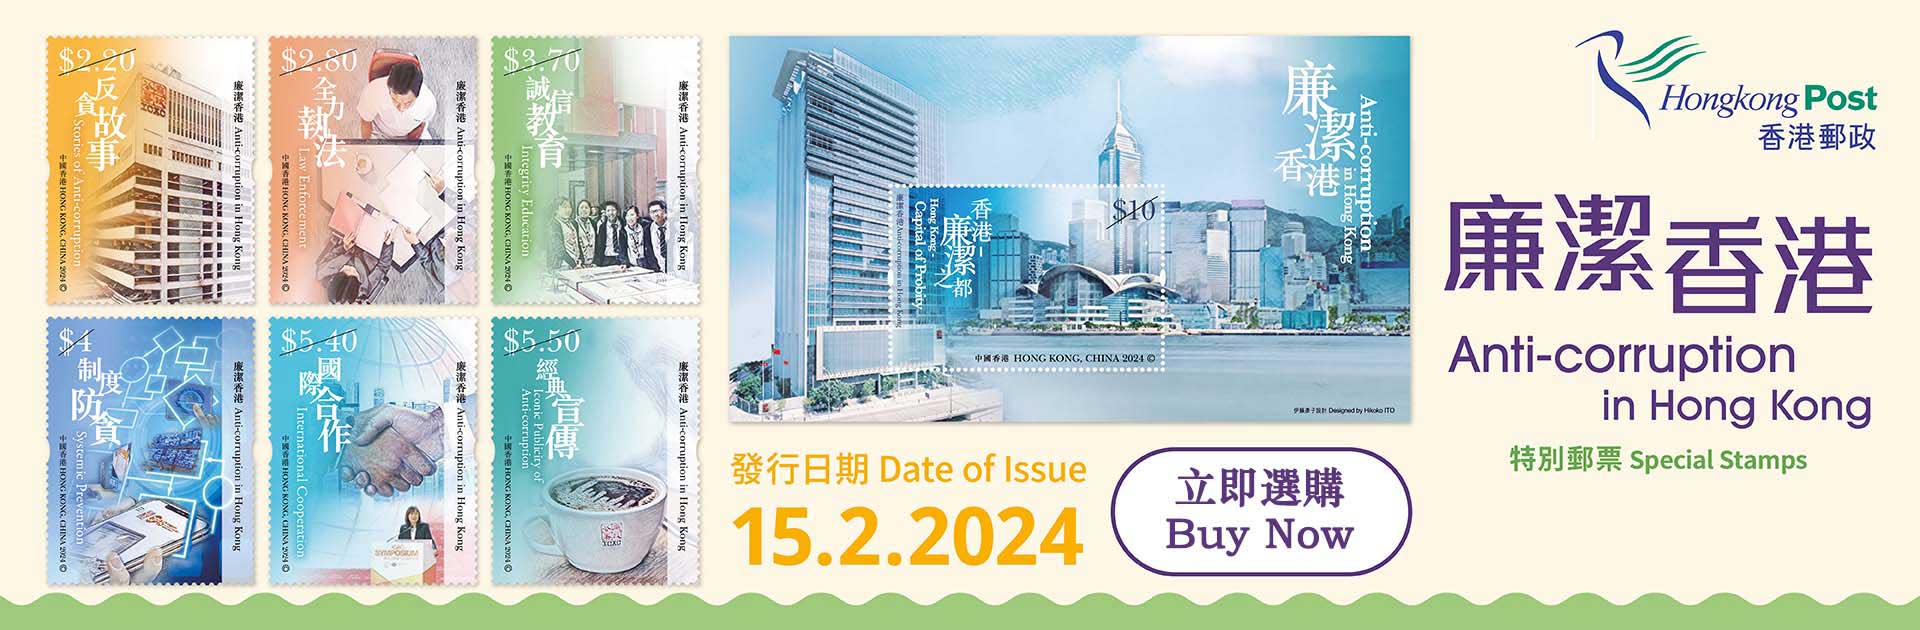 “Anti-corruption in Hong Kong” Special Stamps